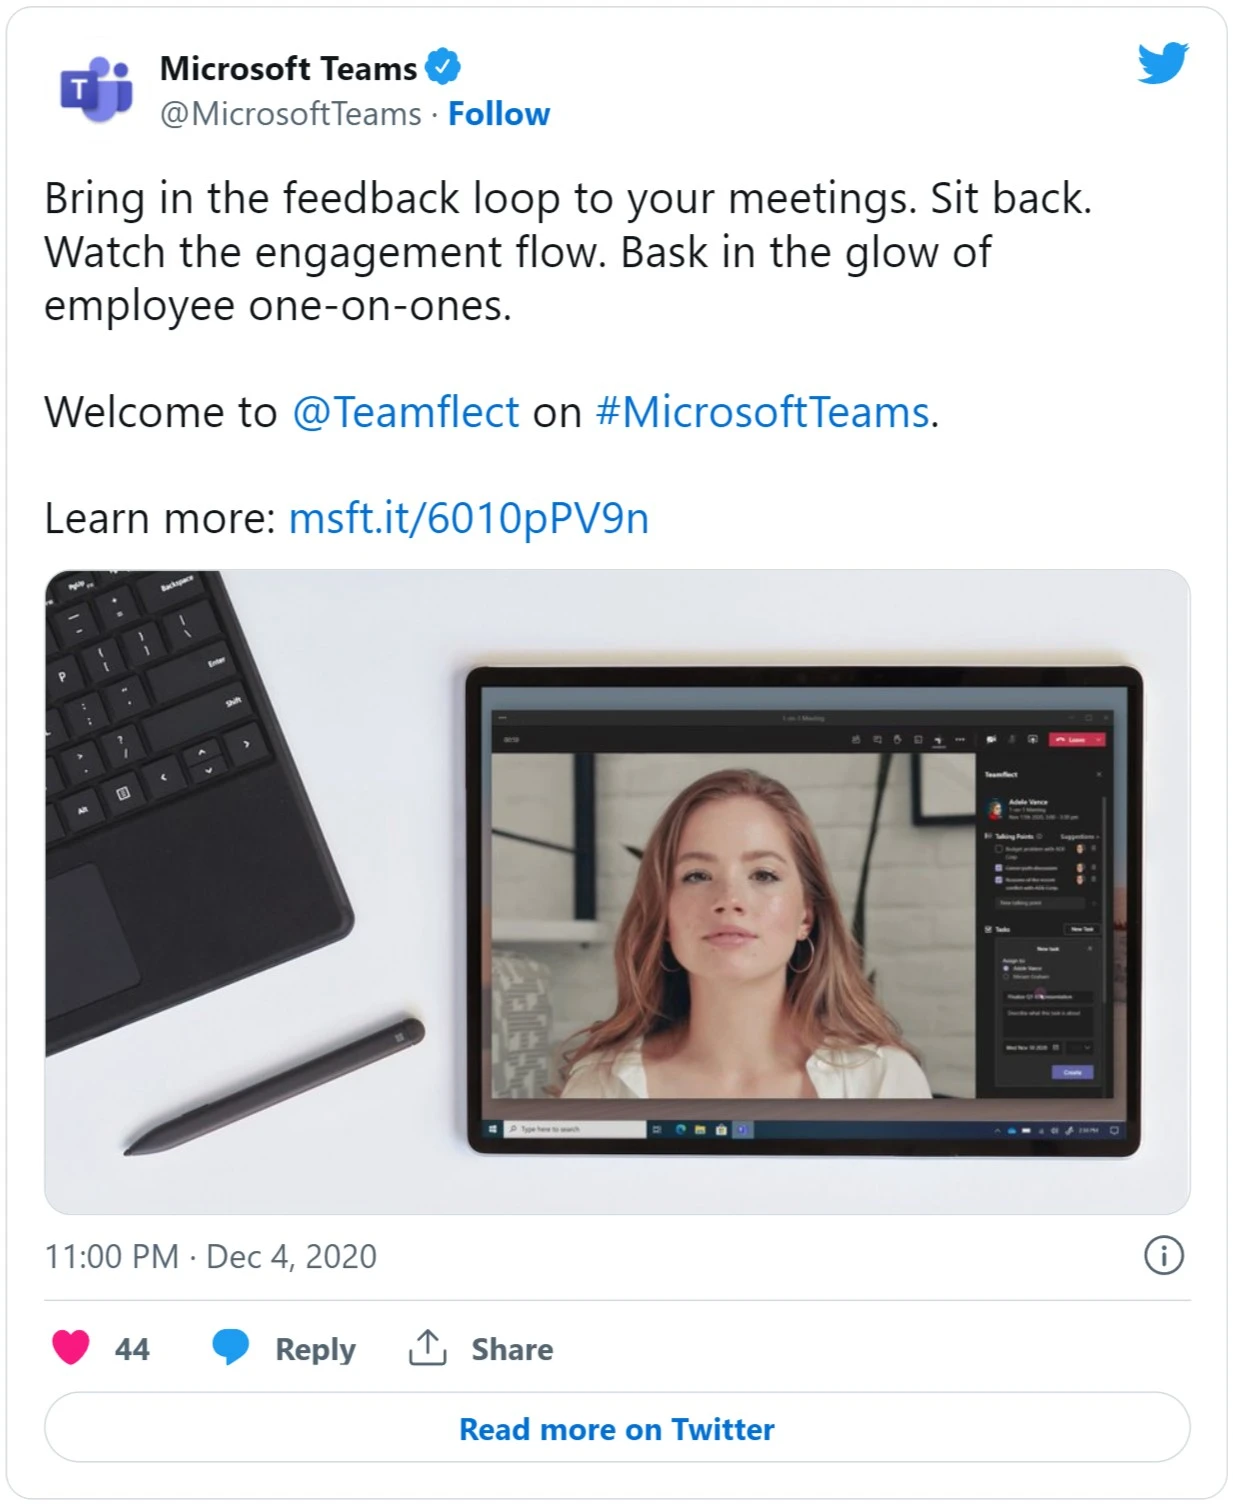 Microsoft Teams official tweet about Teamflect